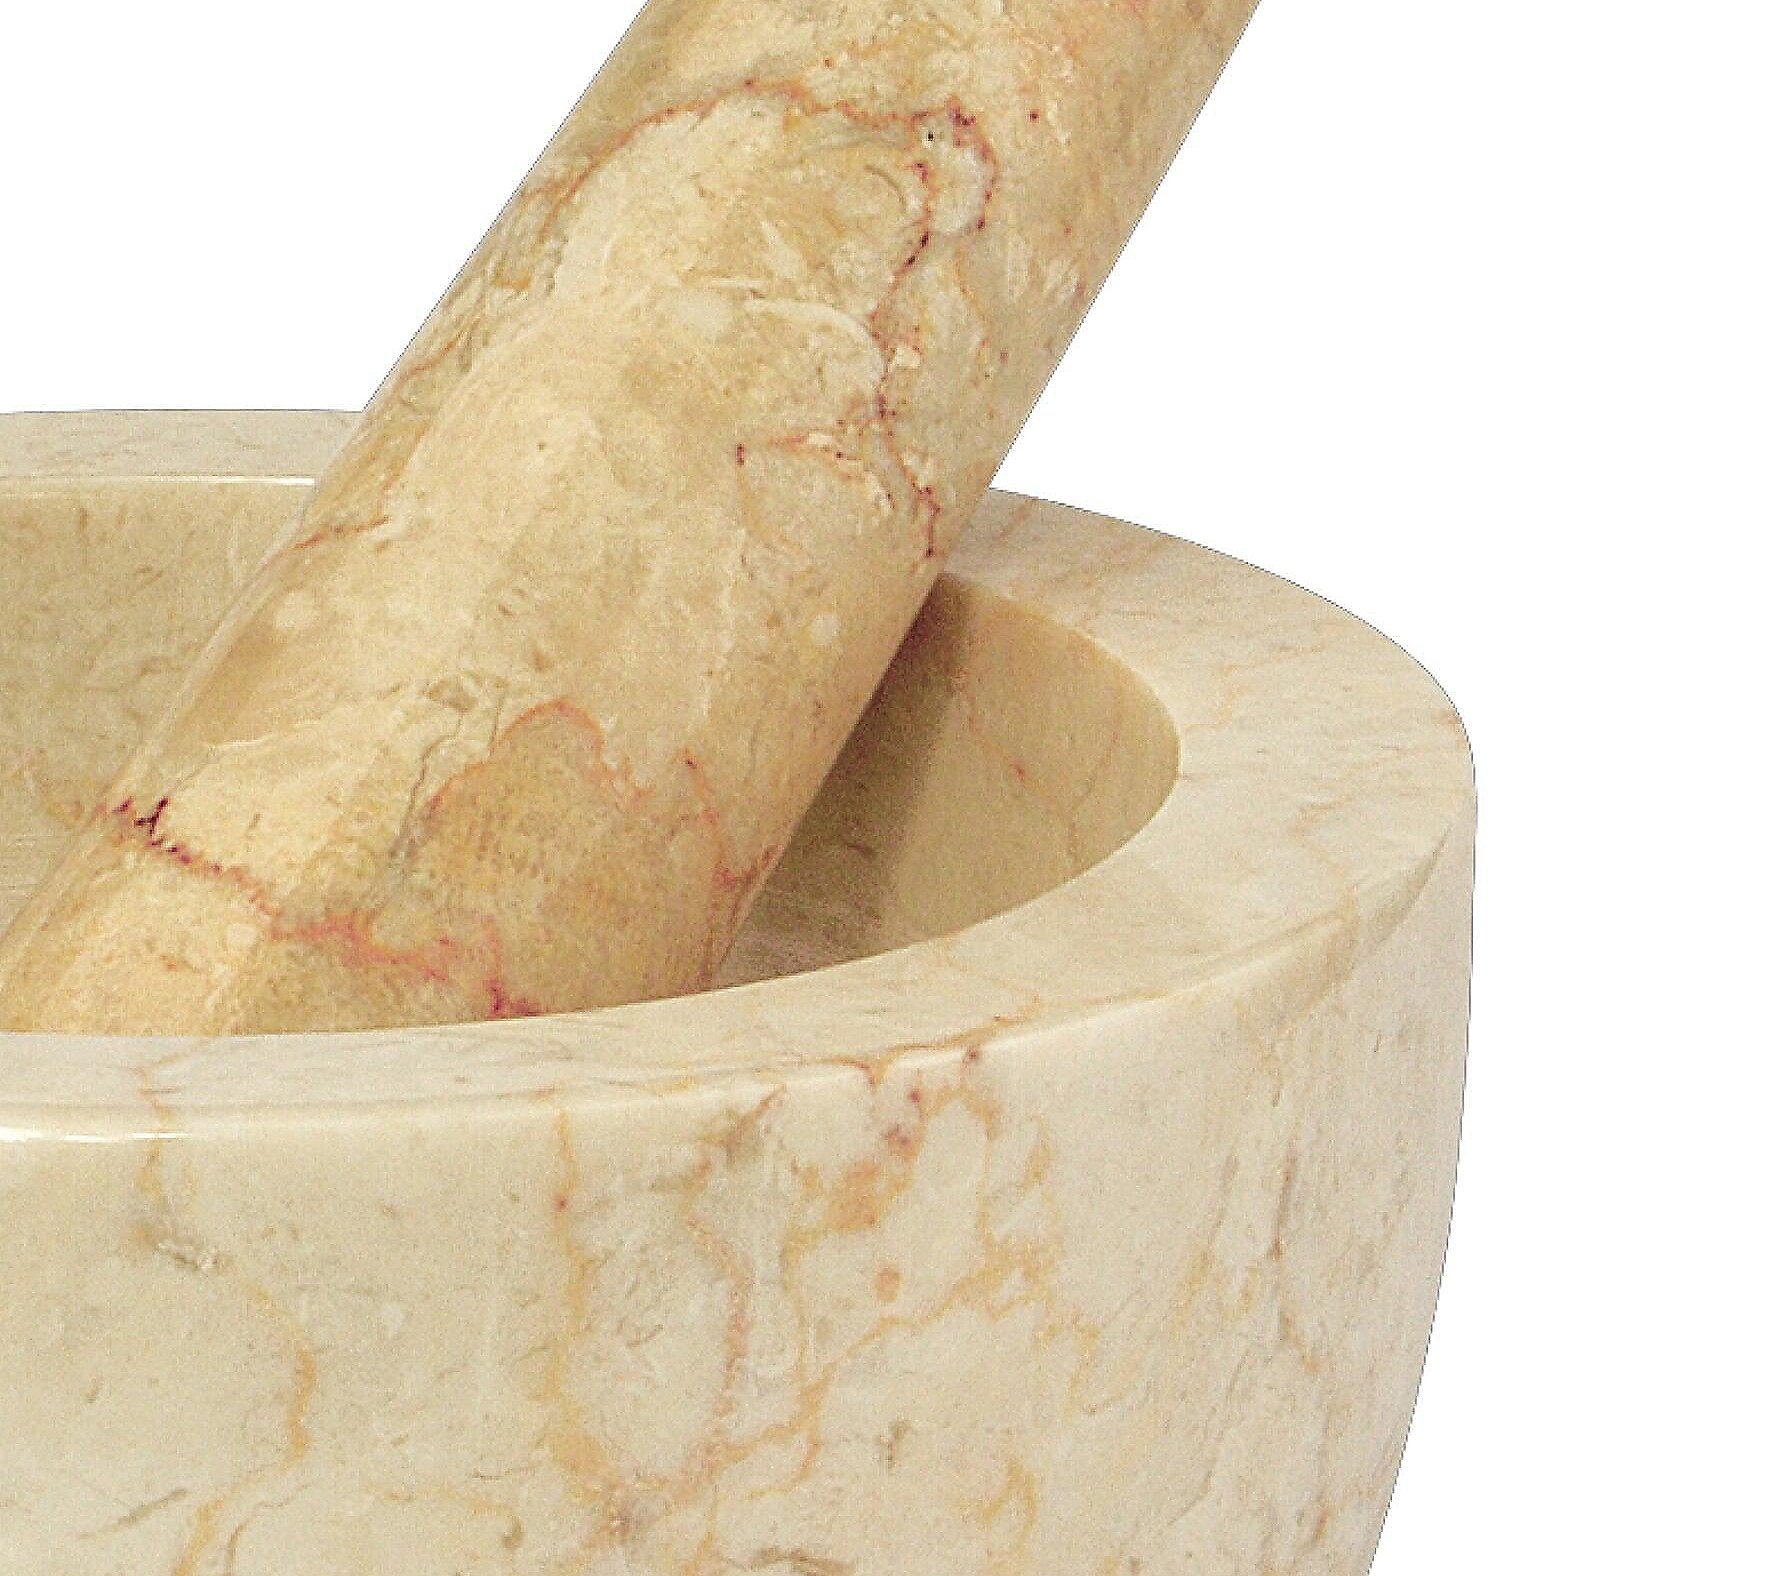 Cilio by Frieling 4 inch Marble Mortar and Pestle